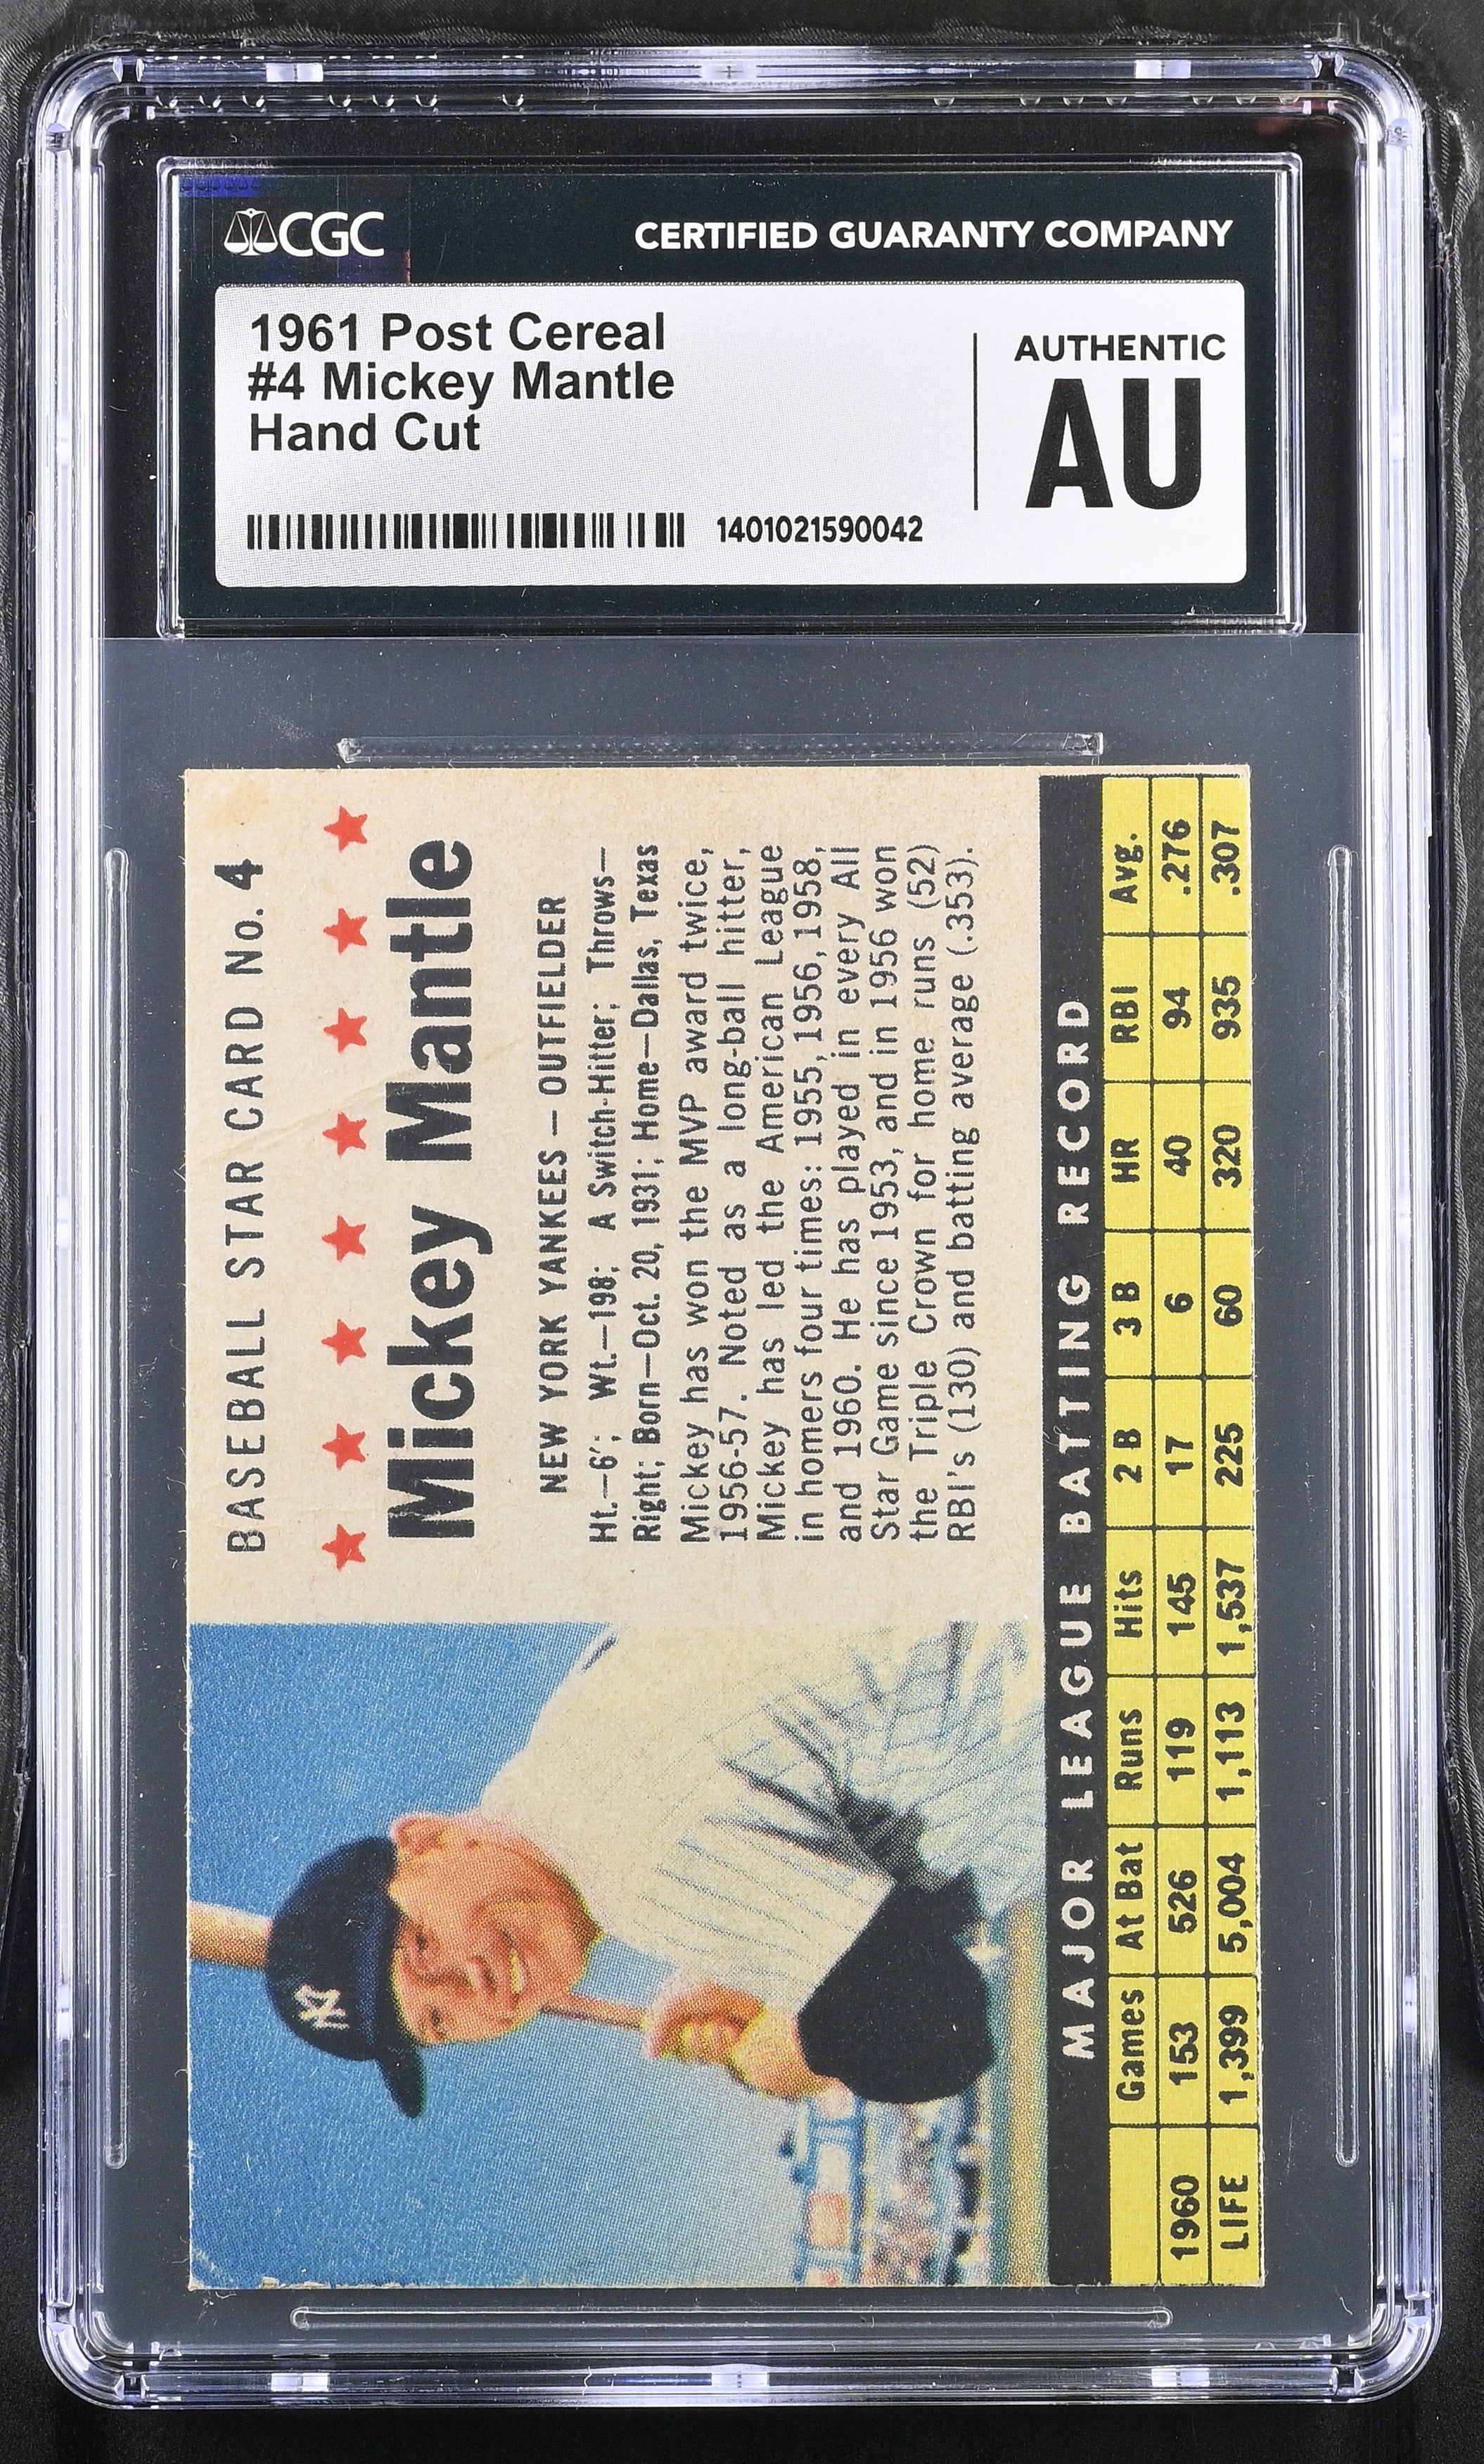 1962 Post Cereal Baseball 4 Mickey Mantle Hand Cut CGC Authentic